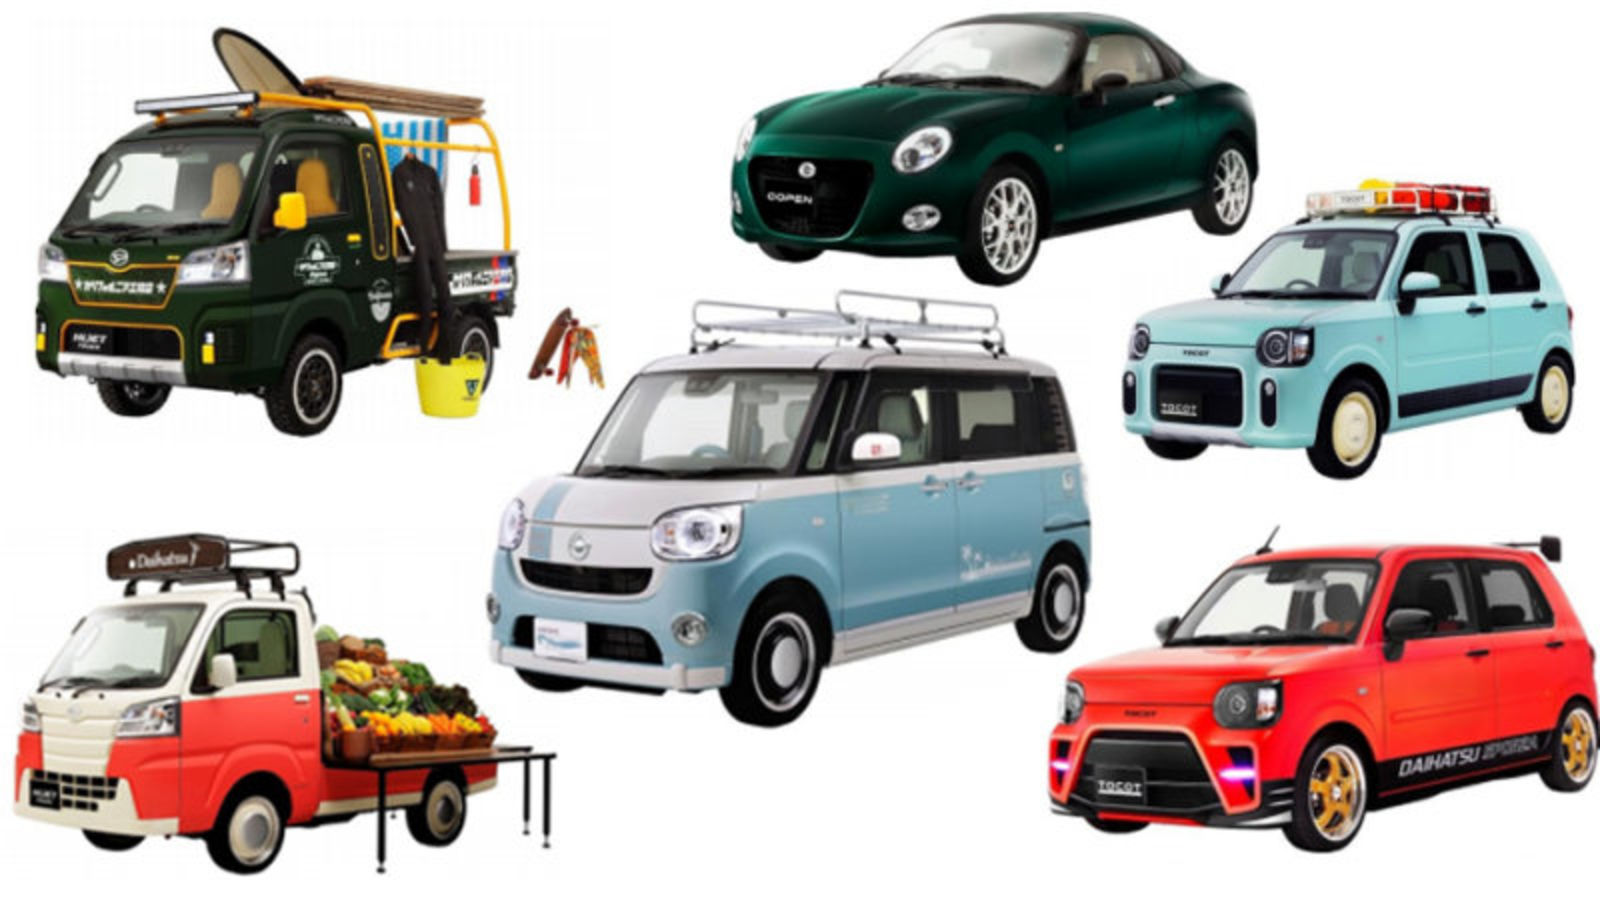 Illustration for article titled Fun Daihatsu Concepts from the Tokyo Auto Salon